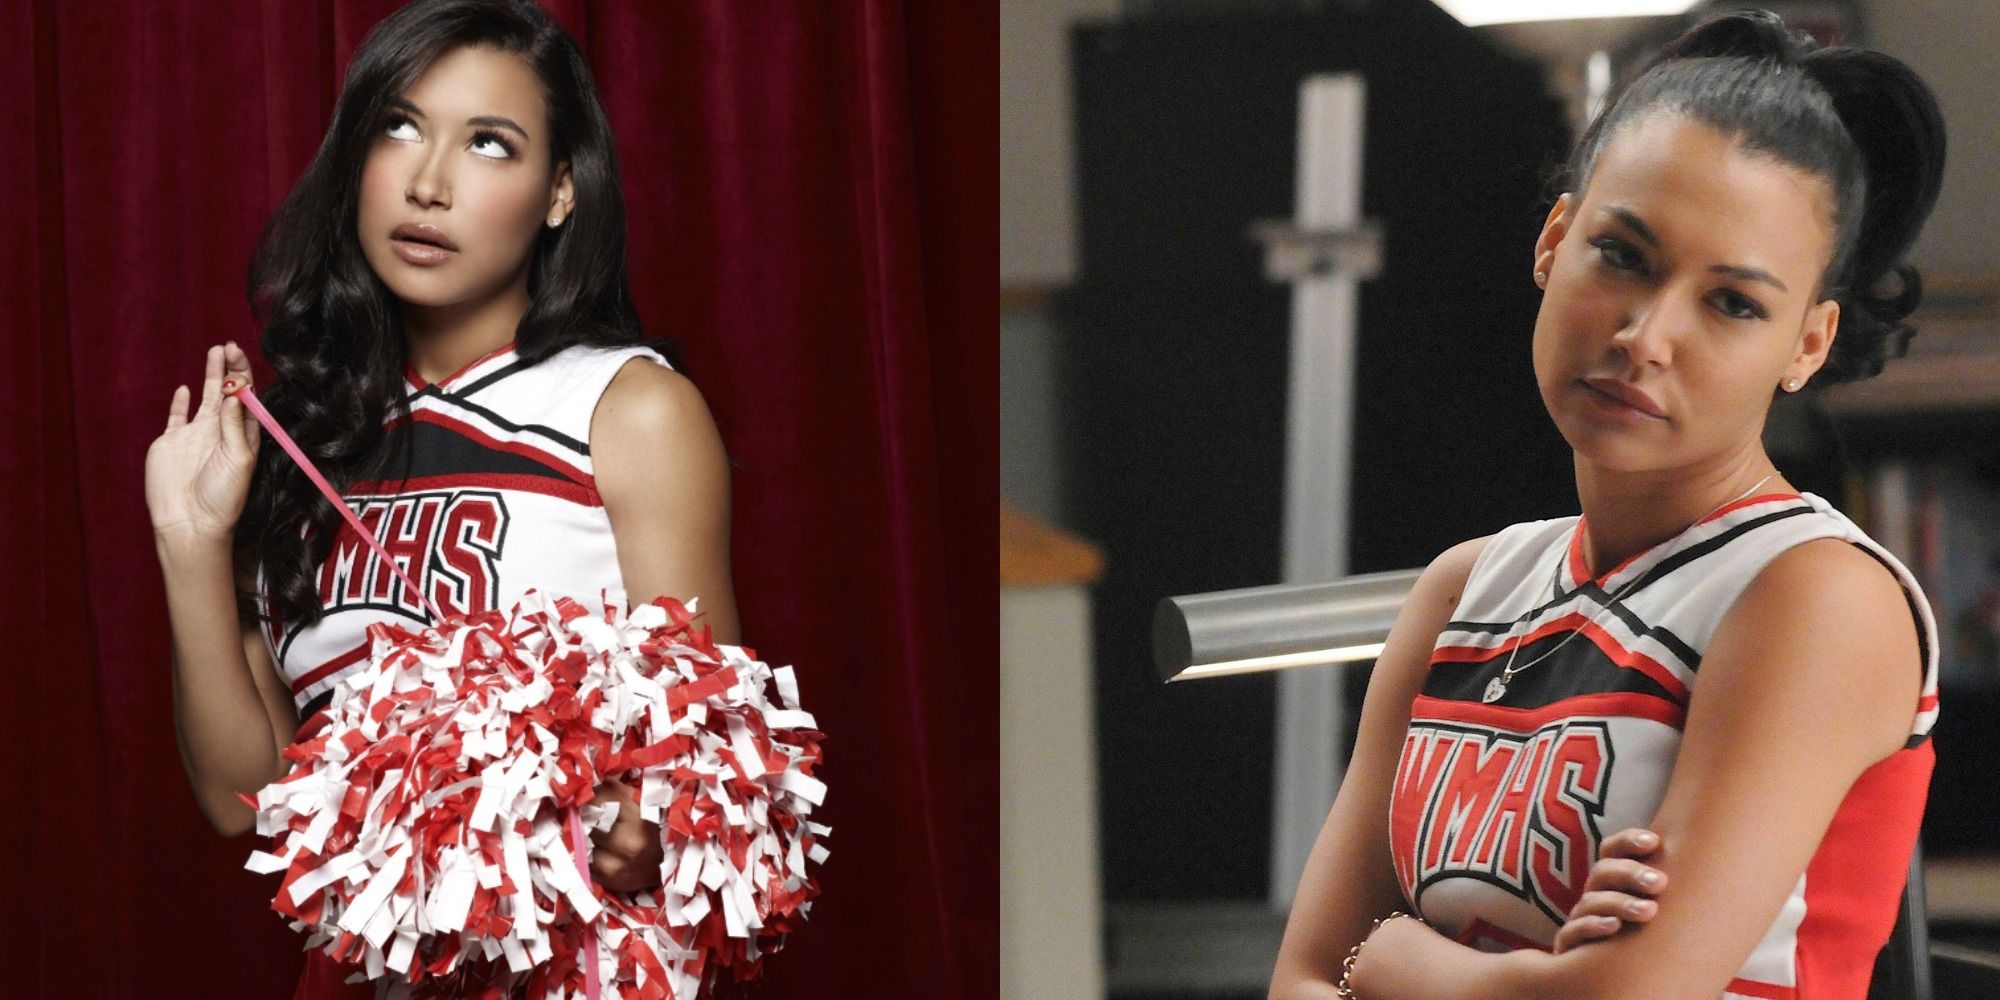 Split image showing Santana posing for a photo and looking annoyed in Glee.